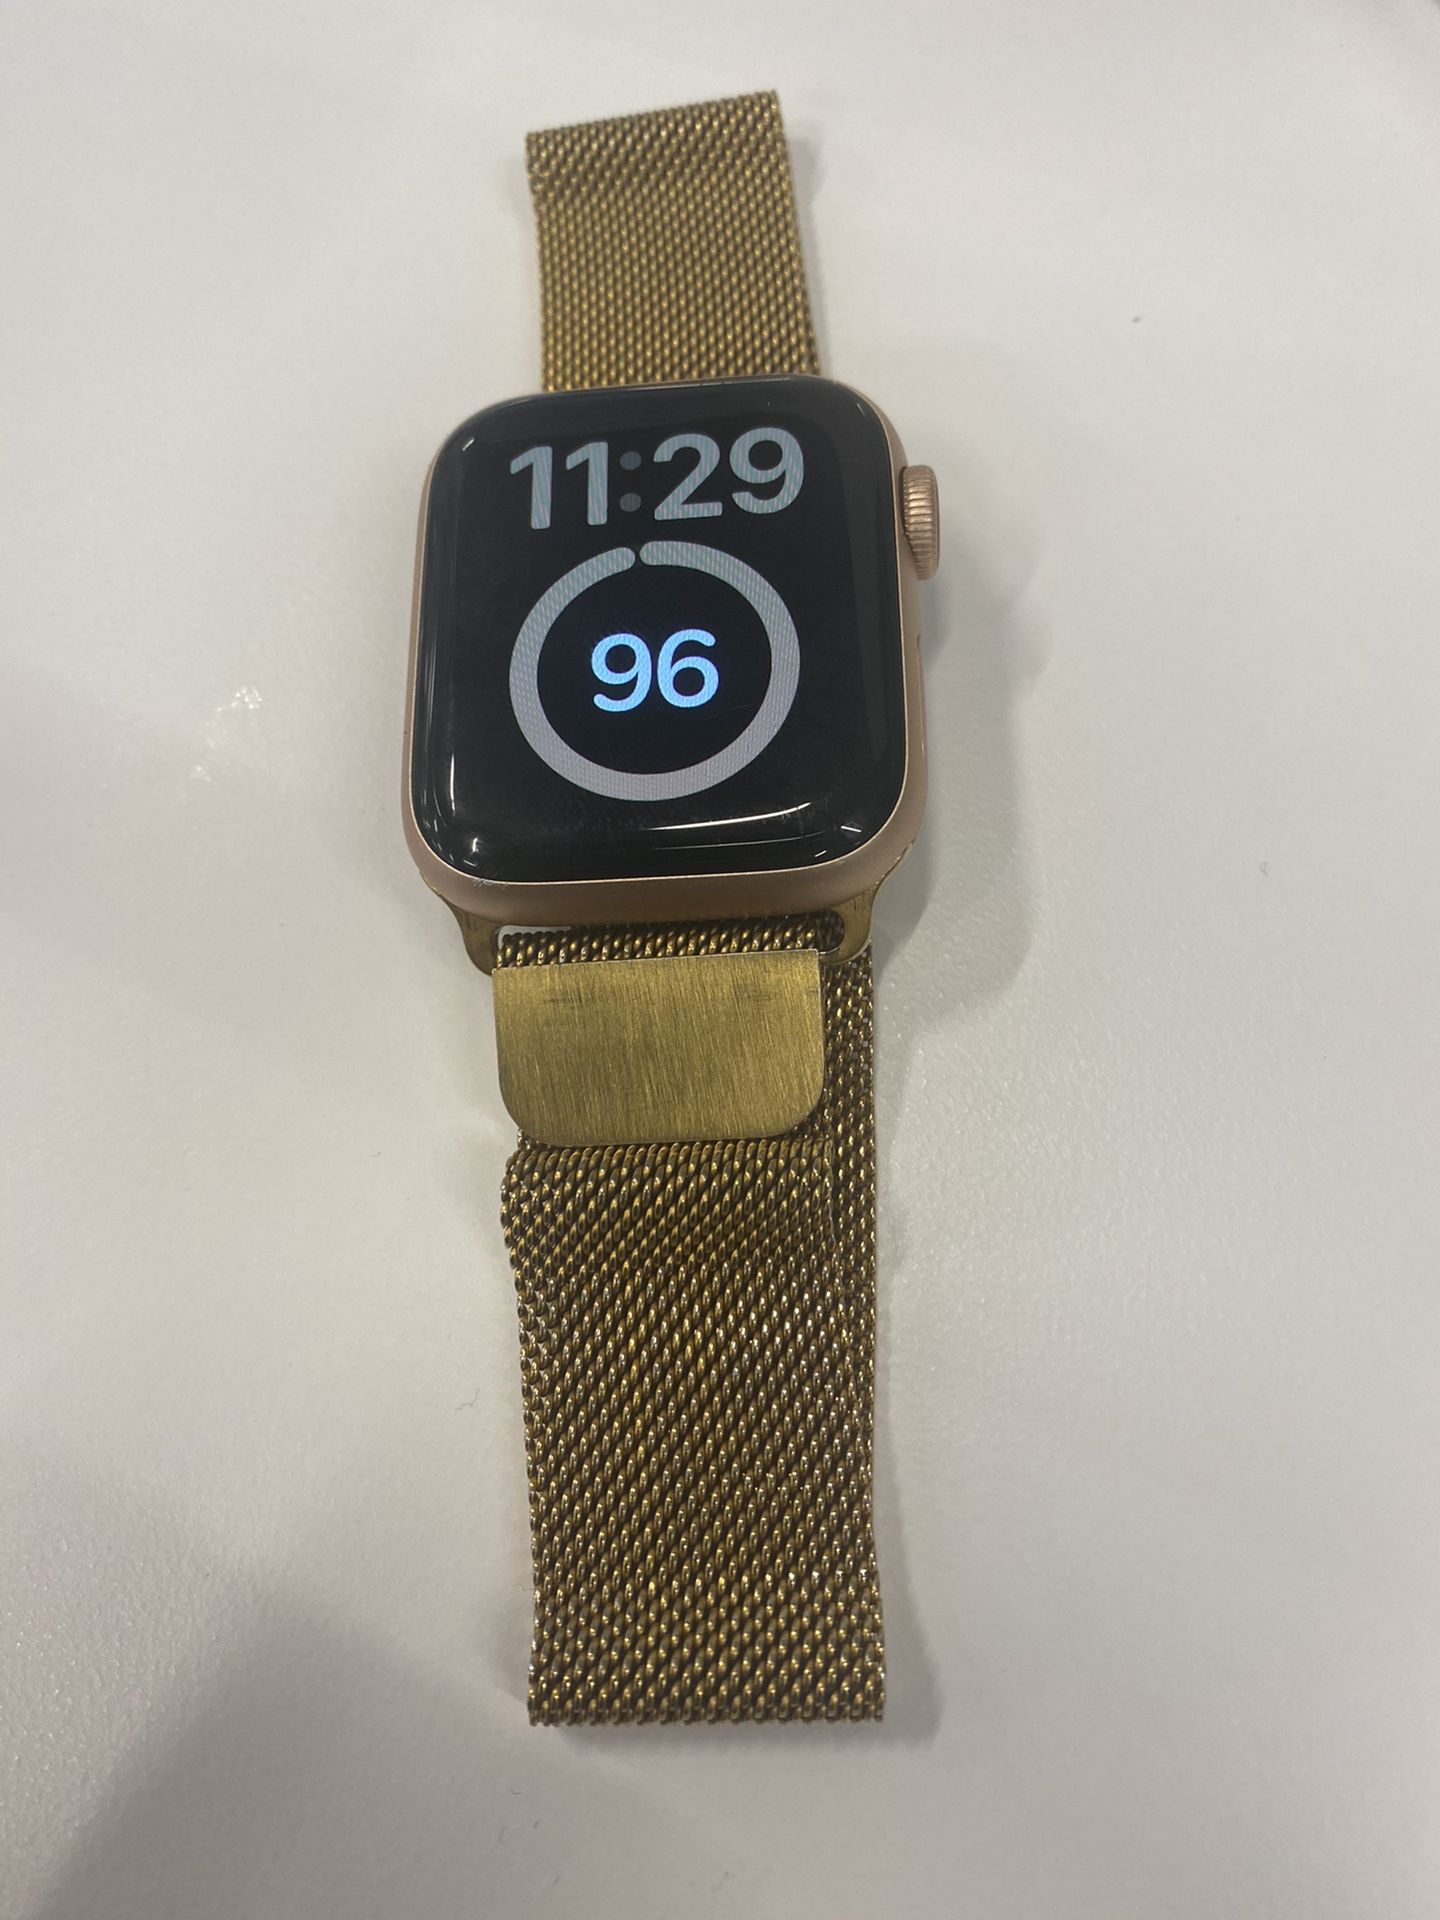 Apple Watch Series 4 Cellular And GPS